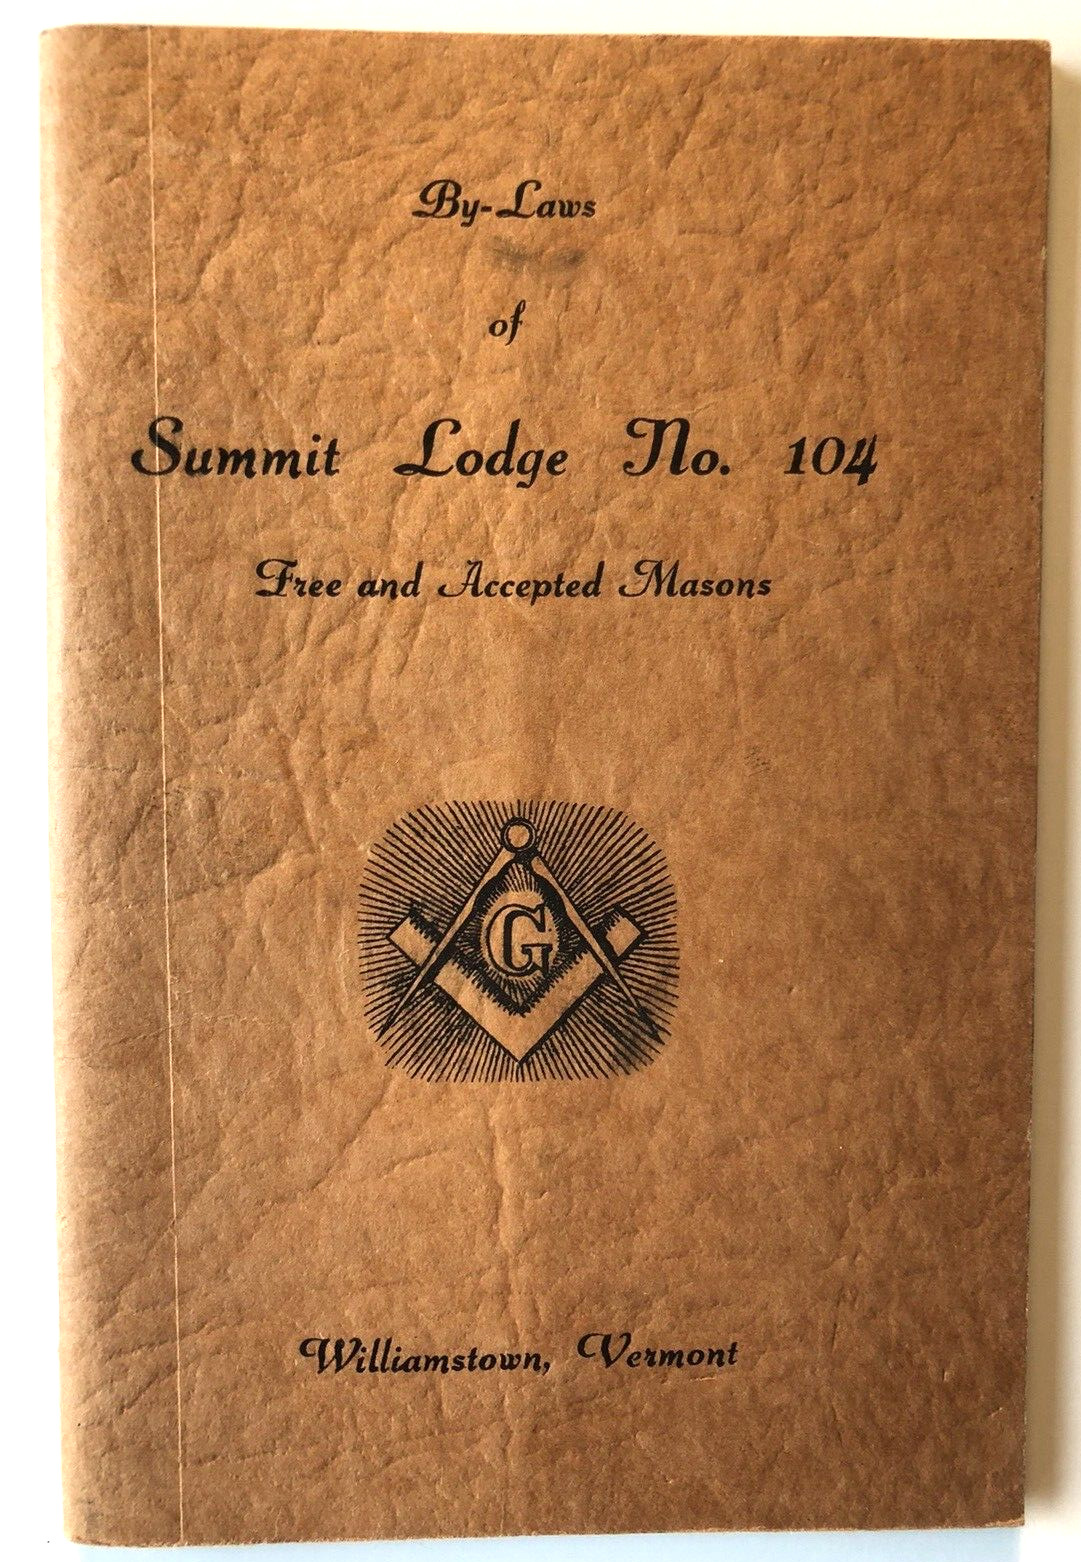 WILLIAMSTOWN VT Free and Accepted Masons Charter & By-Laws Summit Lodge No. 104